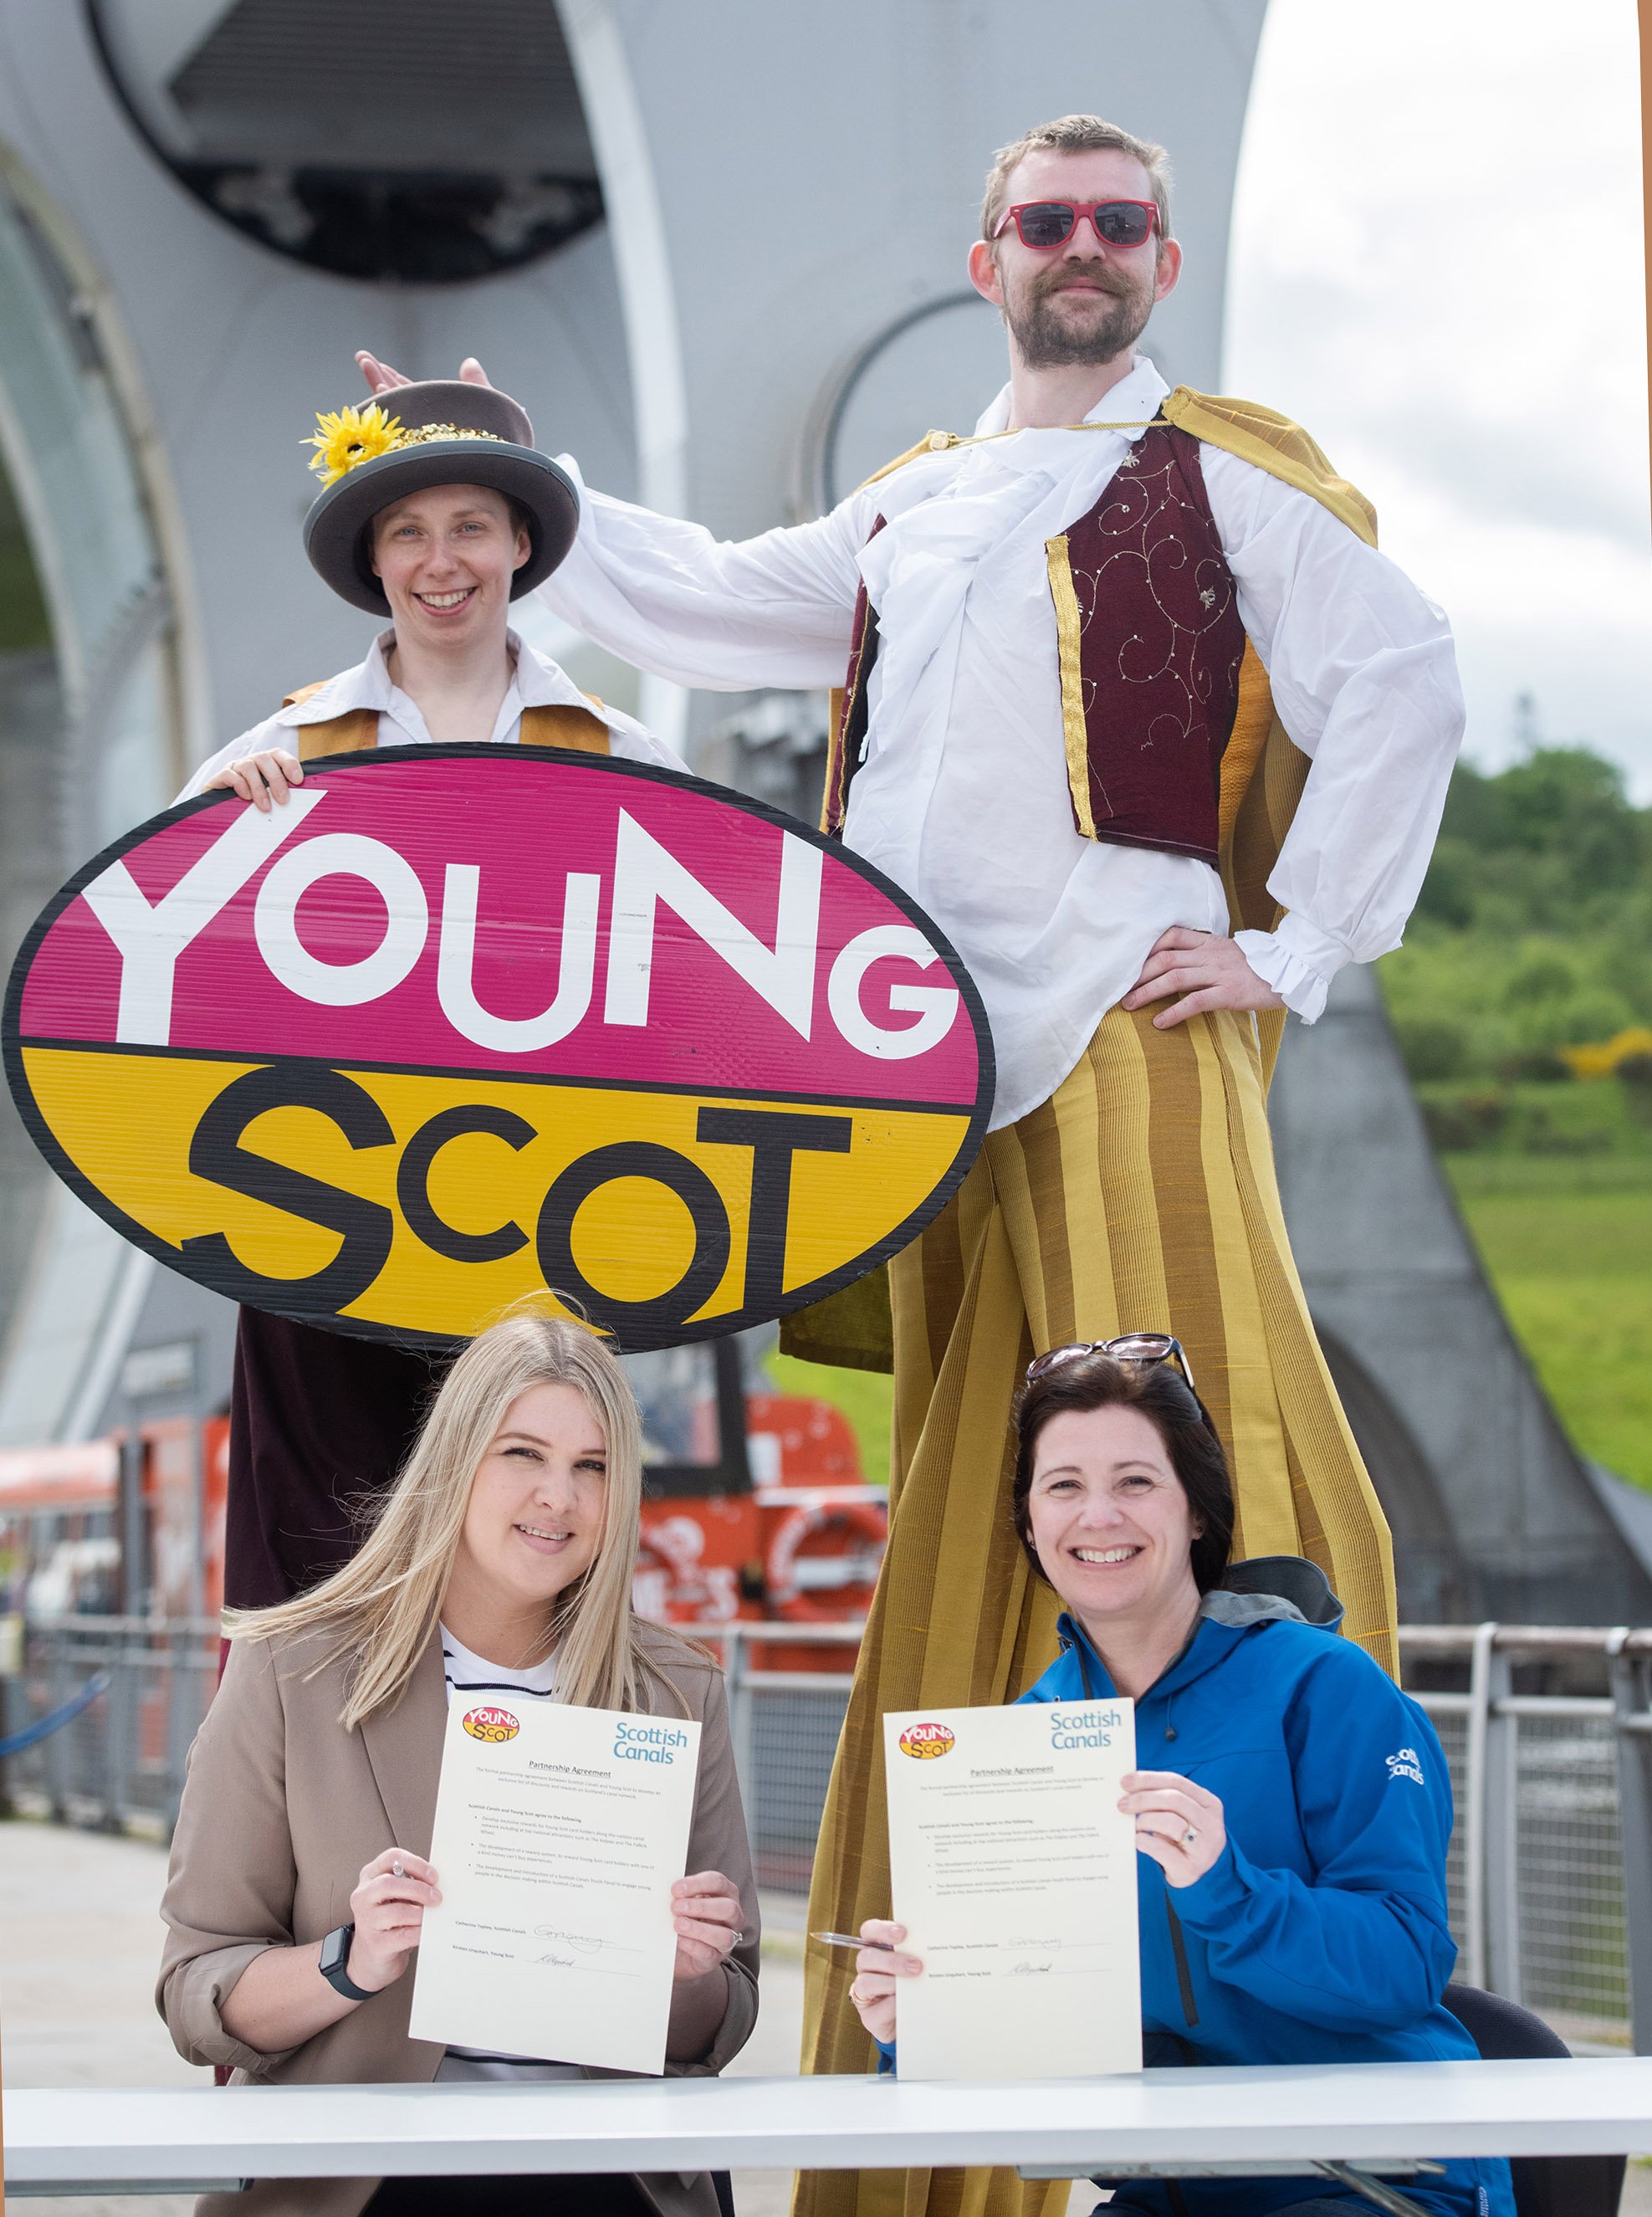 free travel for young scots